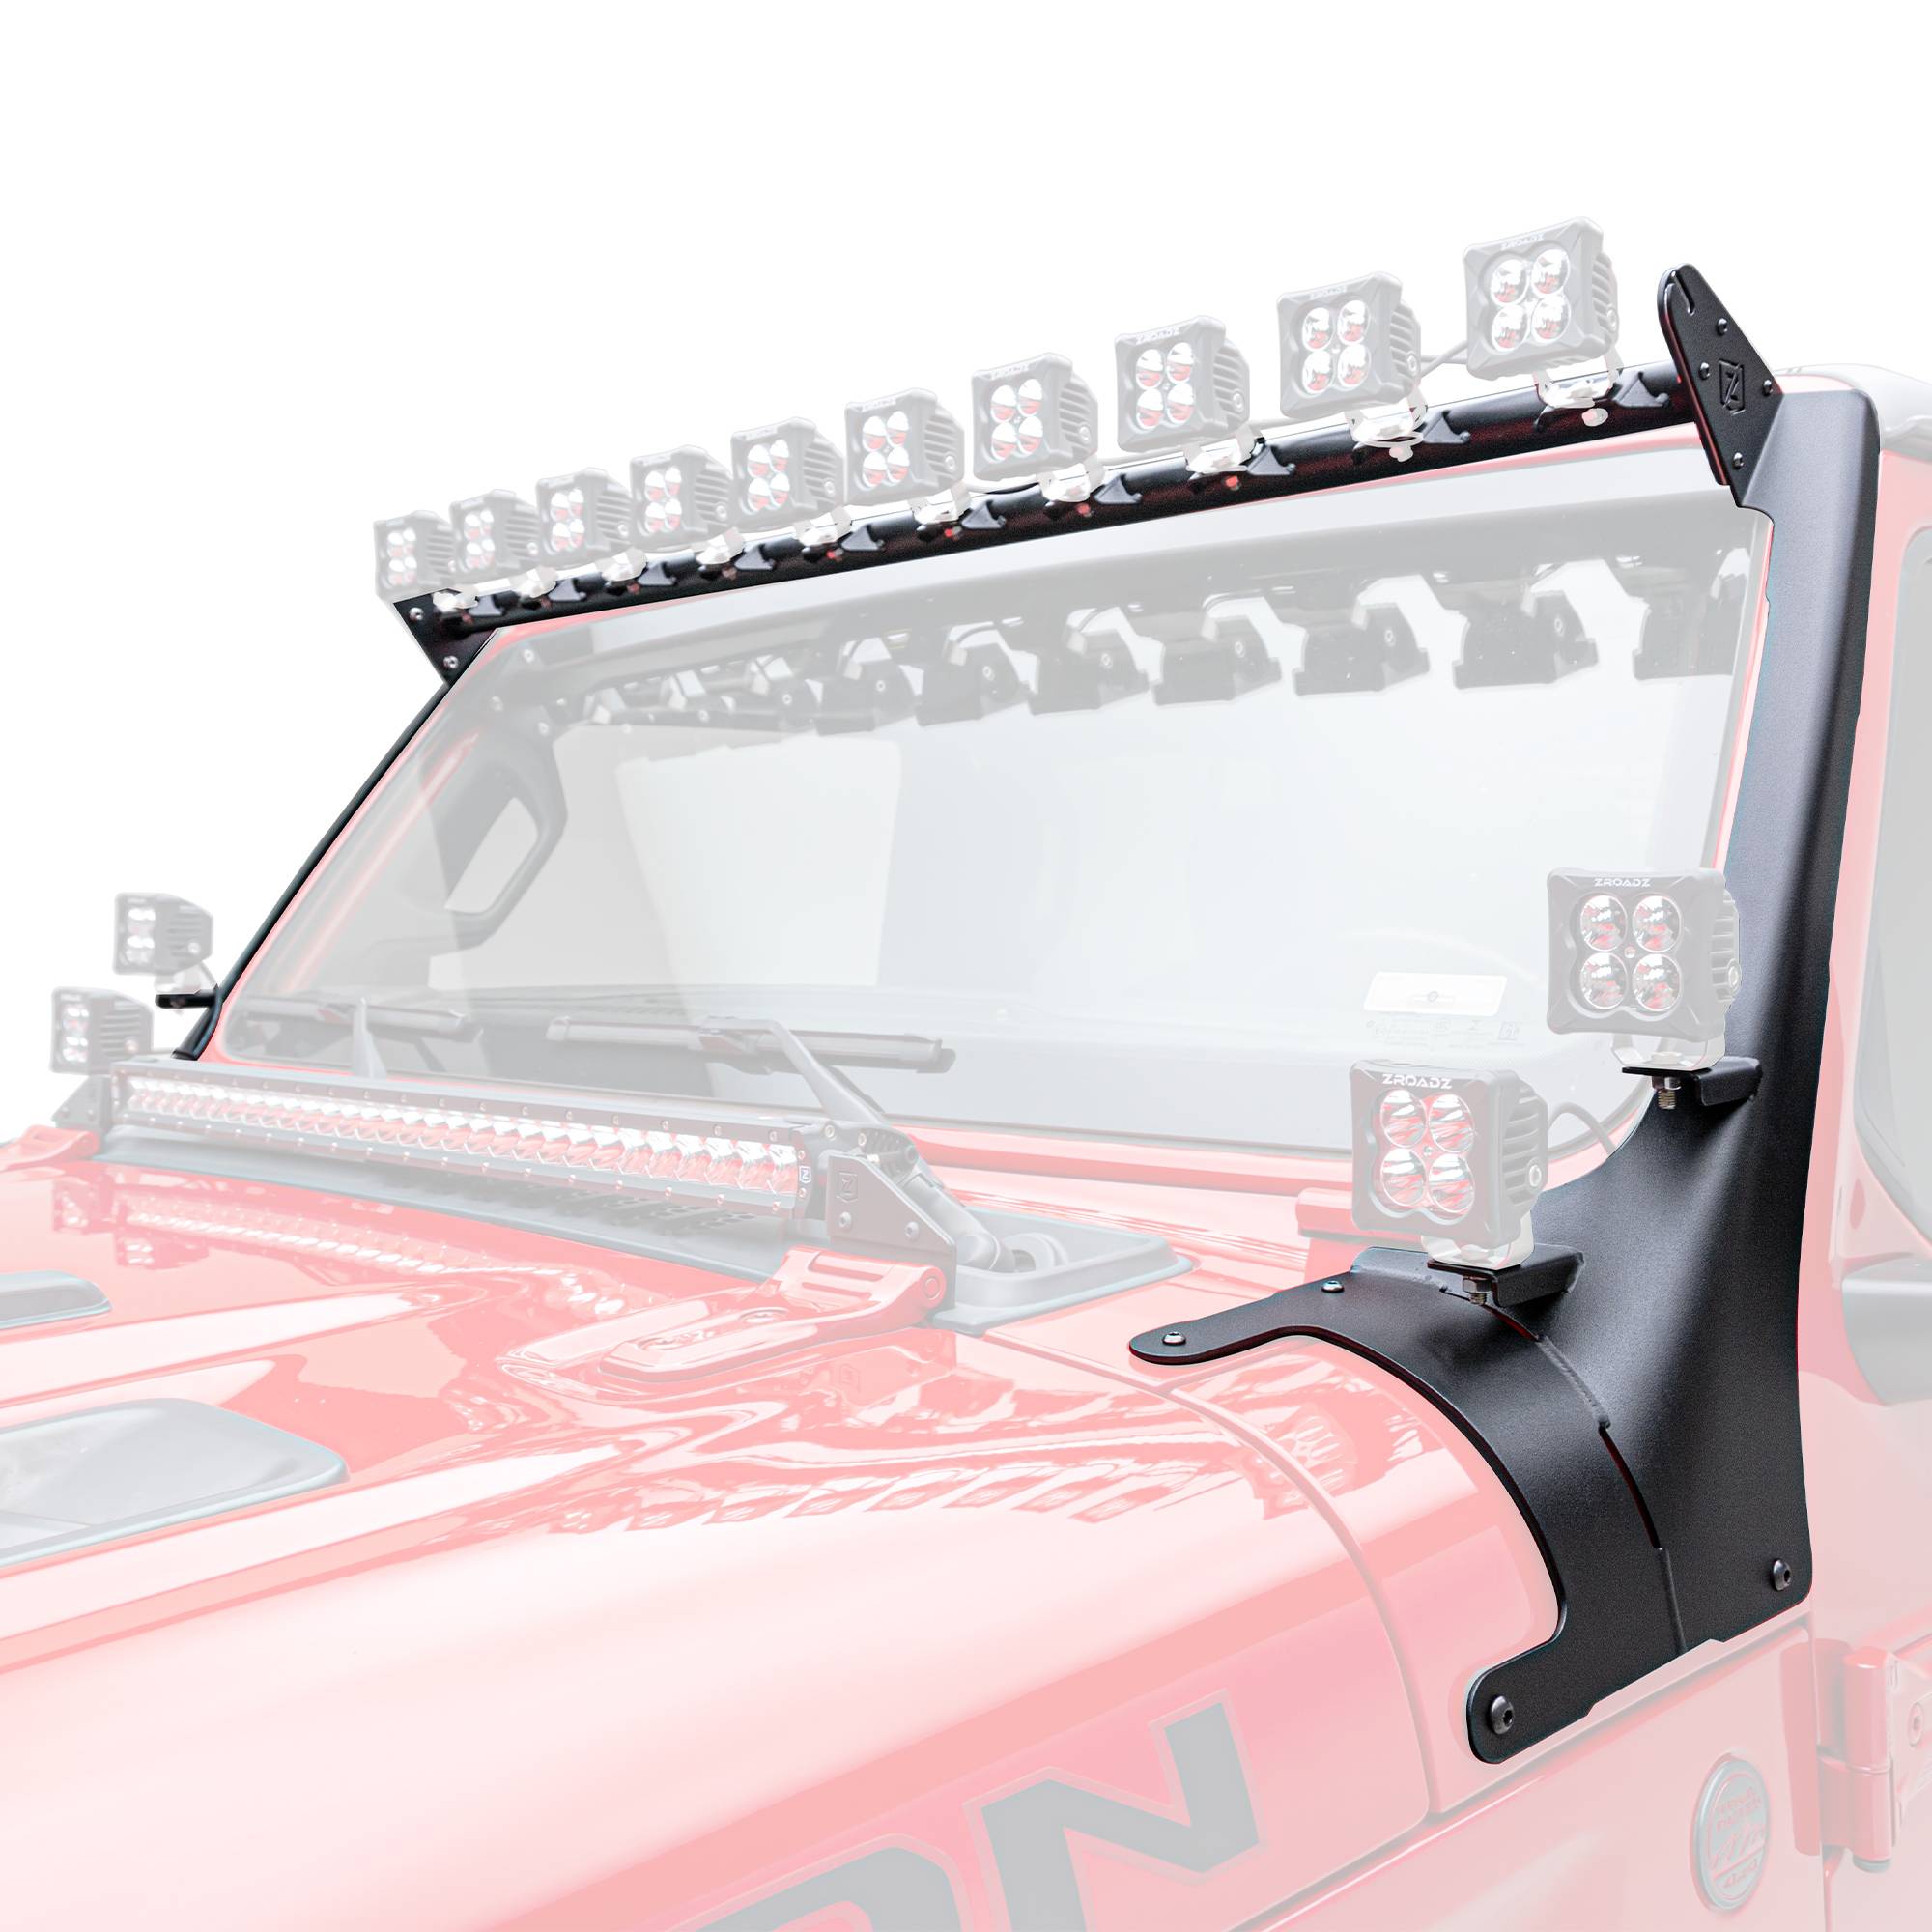 ZROADZ OFF ROAD PRODUCTS - 2019-2022 Jeep Gladiator, JL Multi-LED Roof Cross Bar and 4-Pod A-Pillar Brackets ONLY, Holds (14) 3-Inch ZROADZ Light Pods, (Not Included) - Part # Z934931-BK4